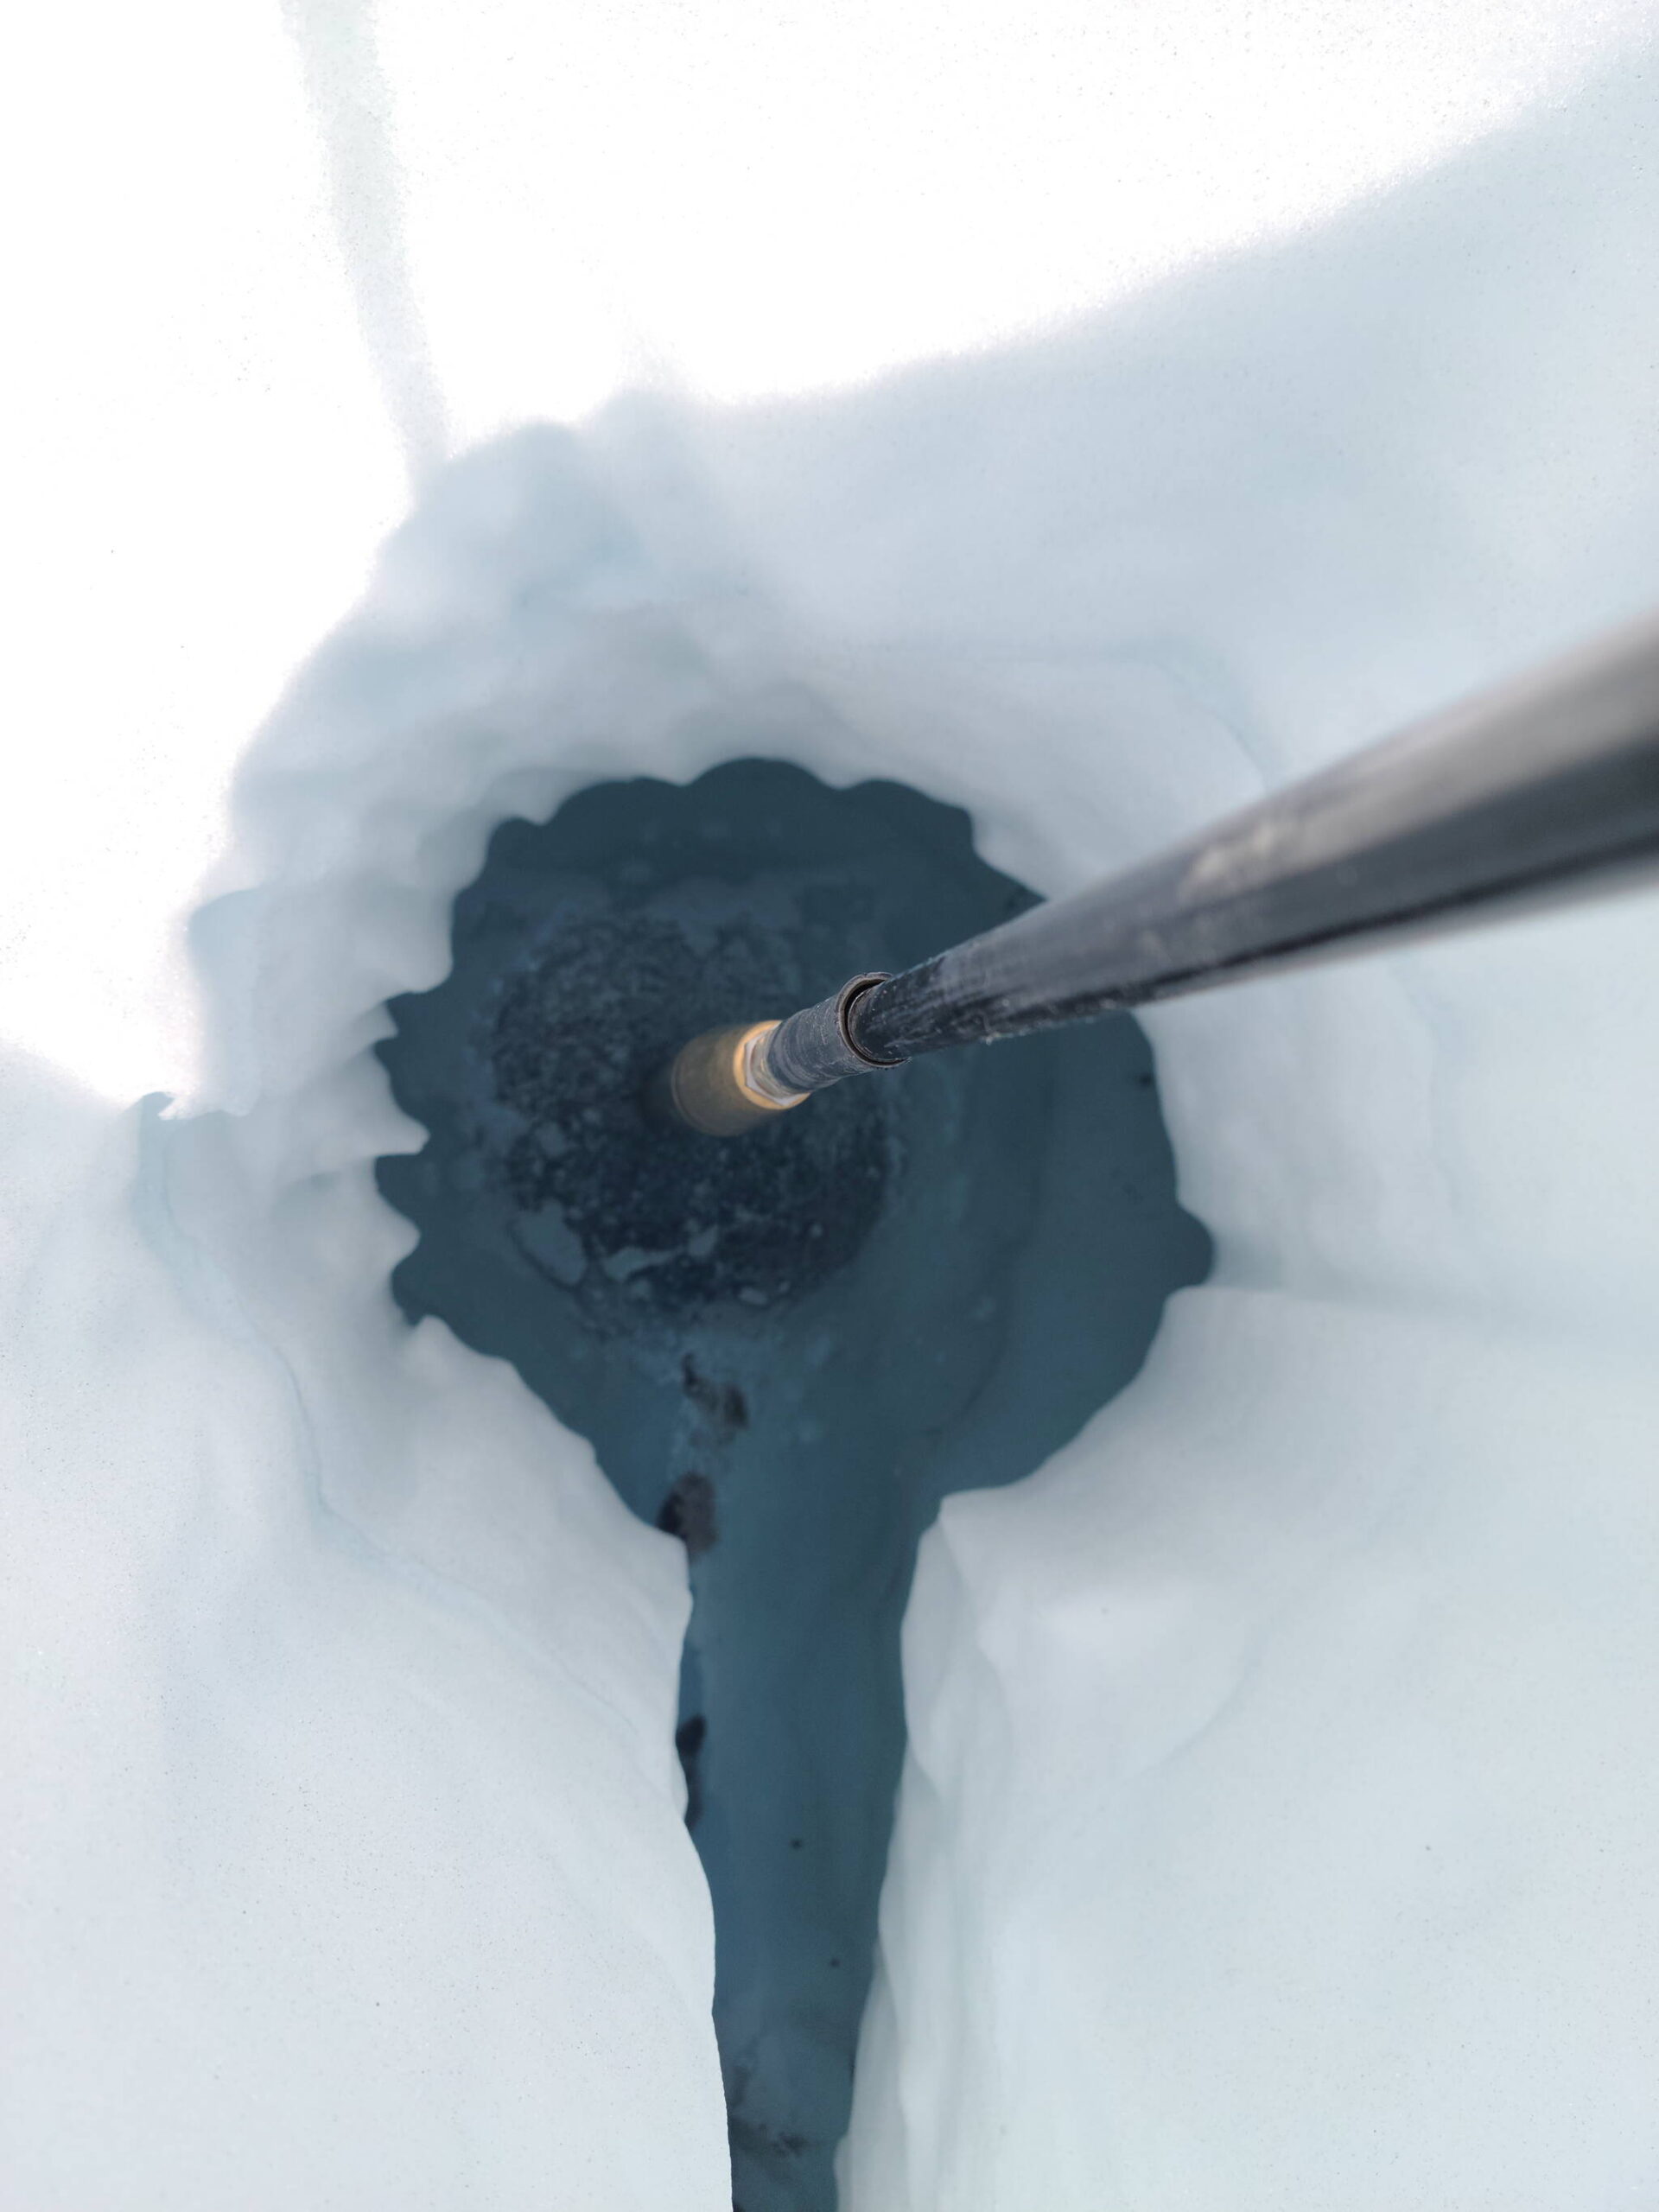 A drill penetrates well below the surface of the Juneau Icefield as researchers study water hundreds of meters beneath earlier this month. (Photo courtesy of Jacob Holmes)